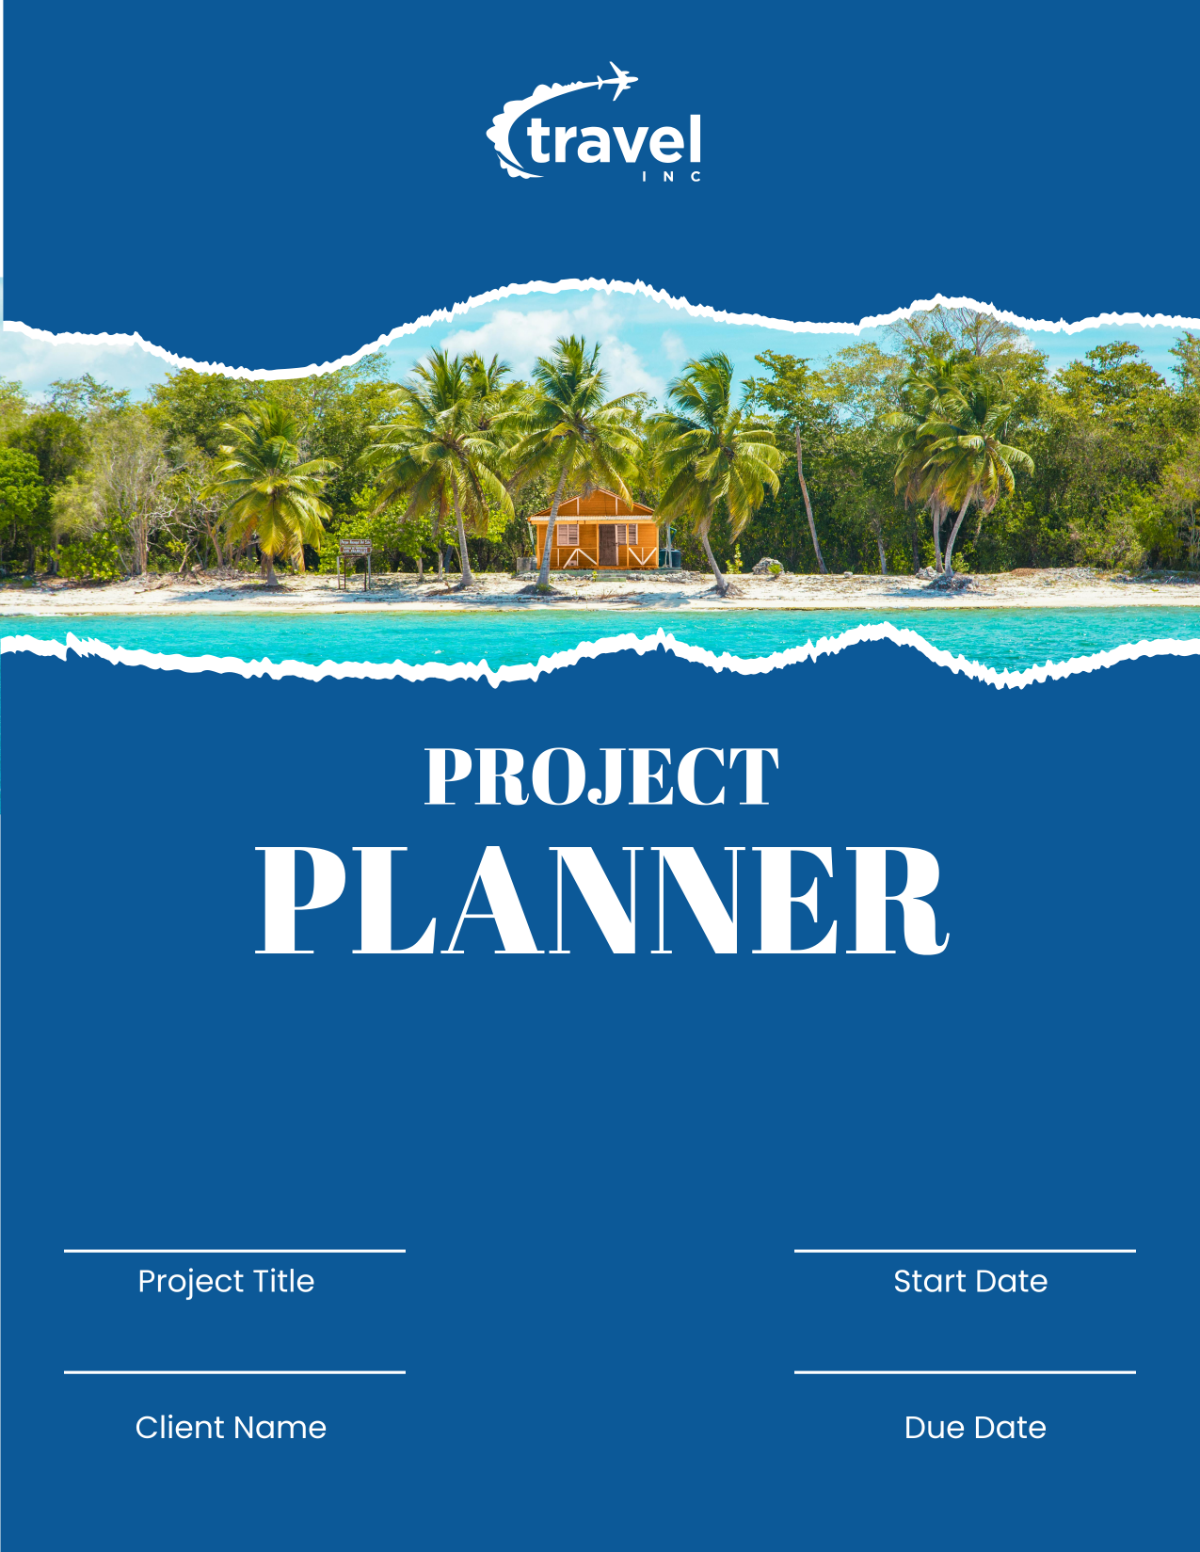 Travel Agency Project Planner